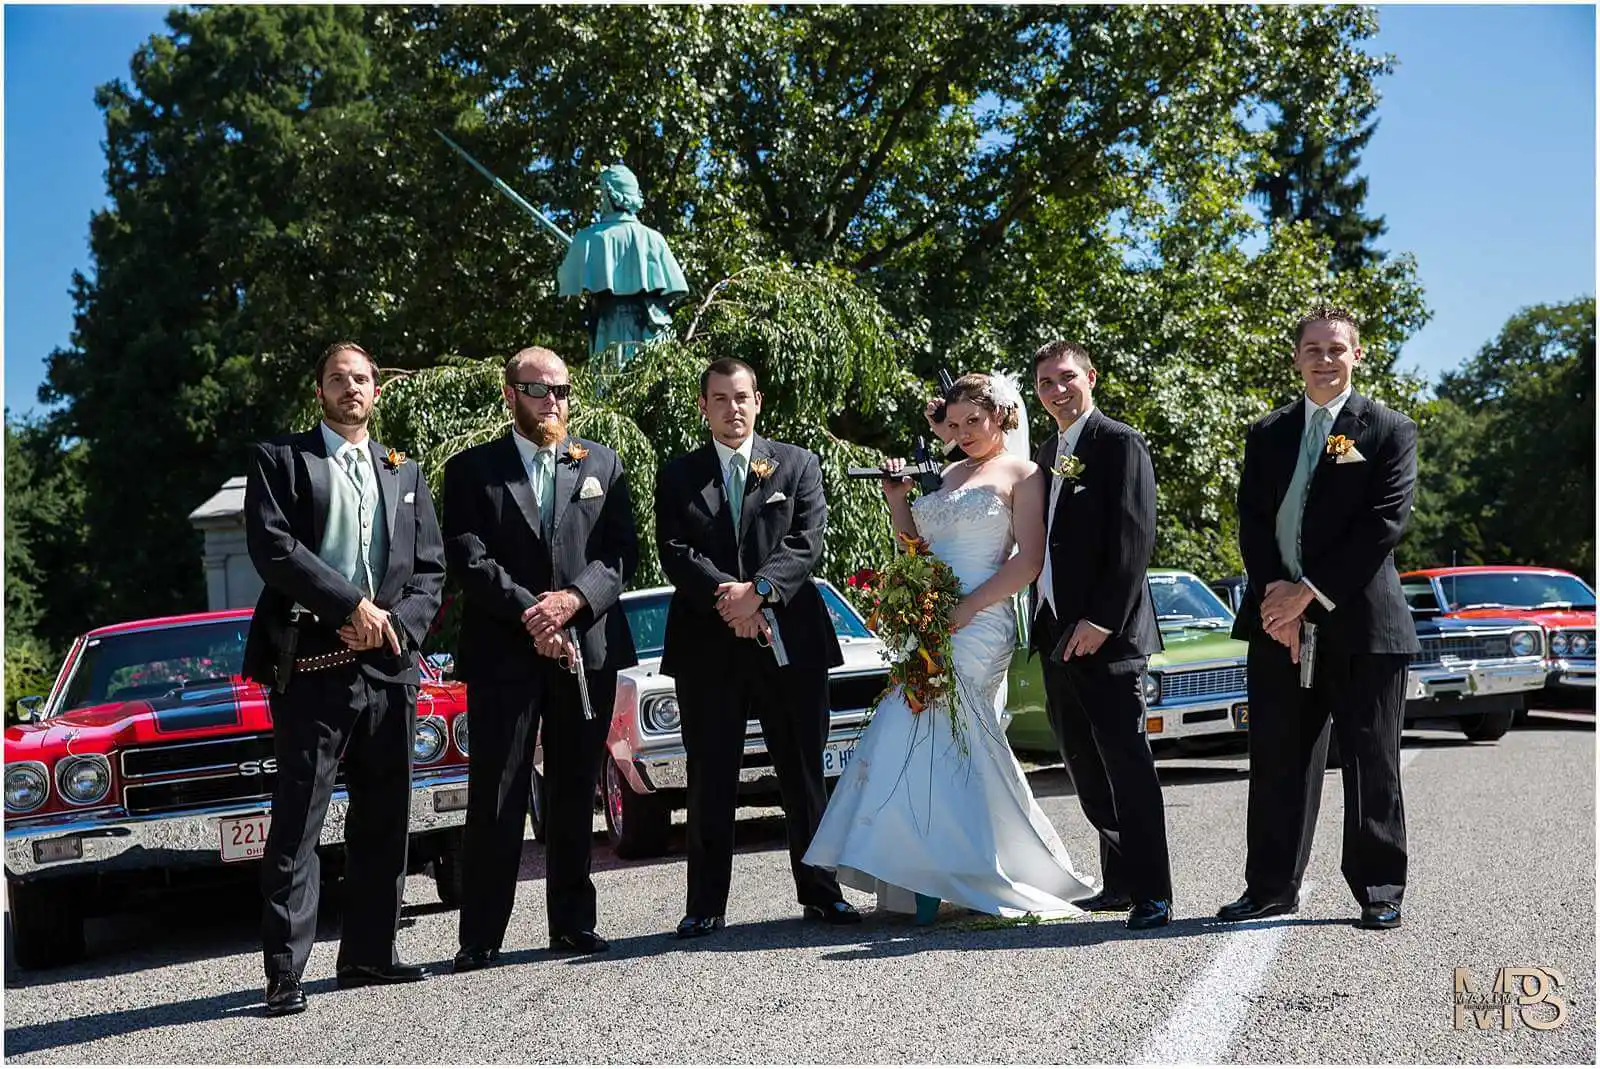 Outdoor wedding party with classic cars and stylish attire.